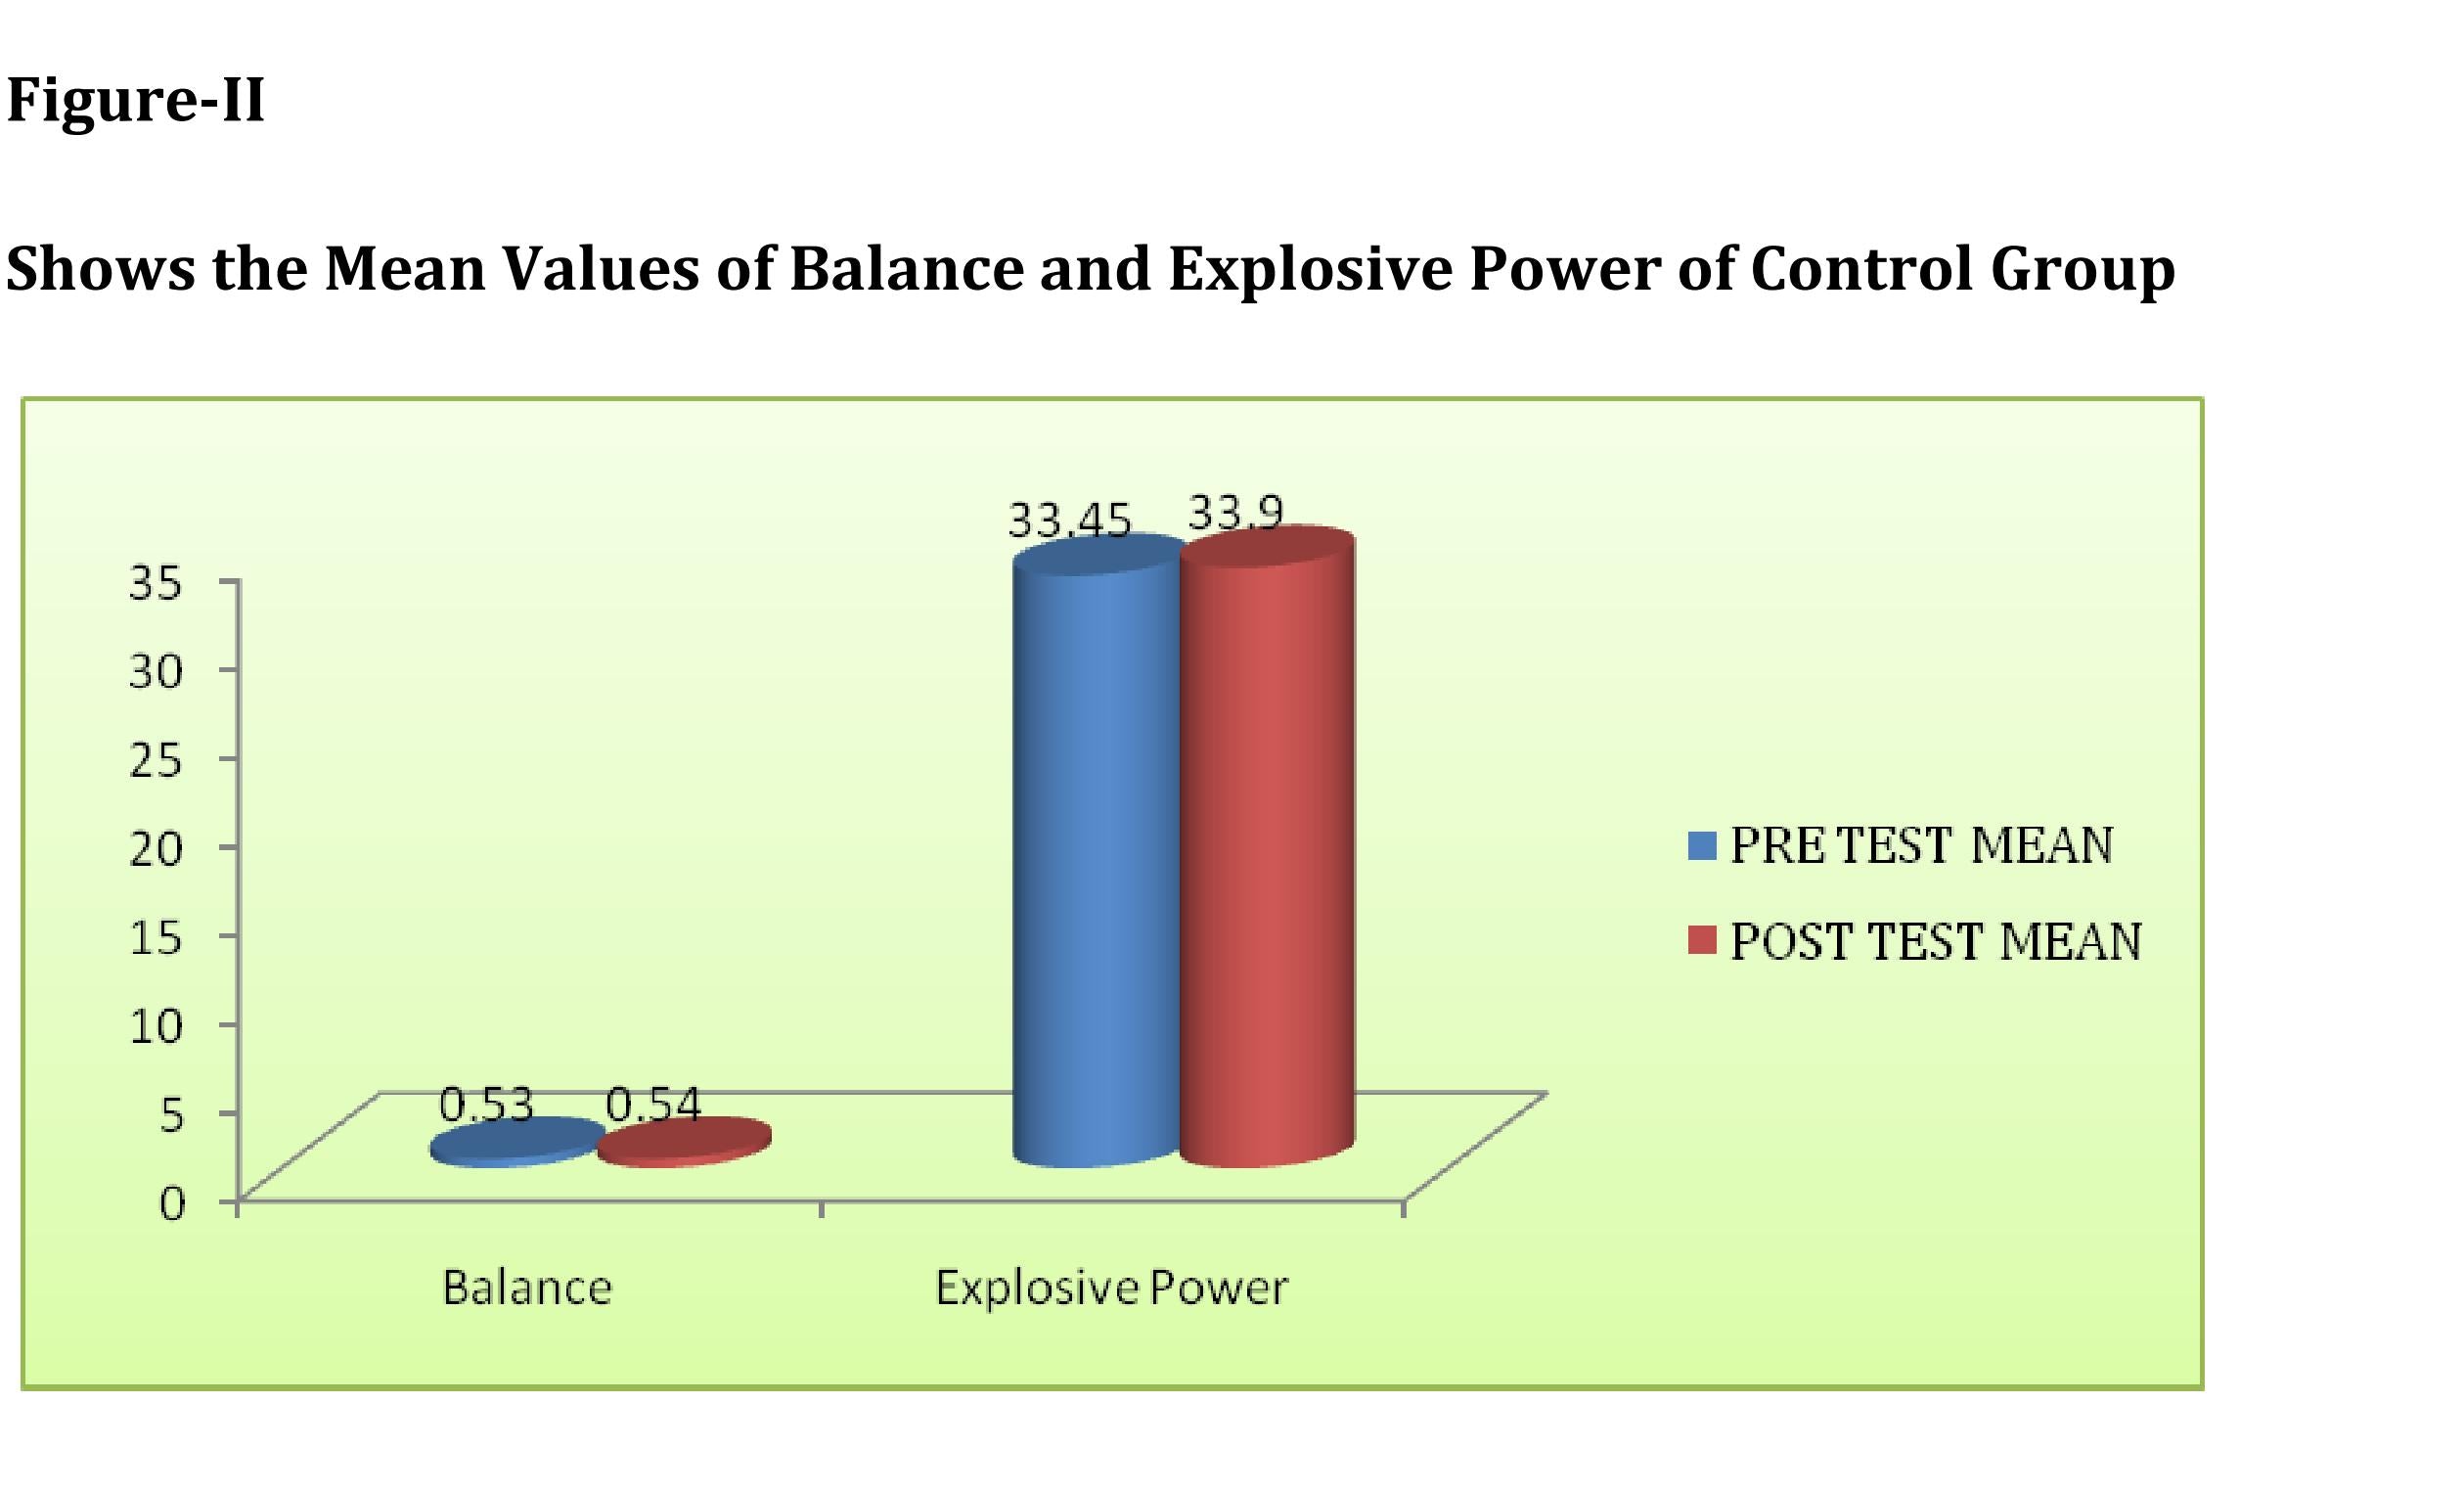 shows-the-mean-values-of-balance-and-explosive-power-of-control-group